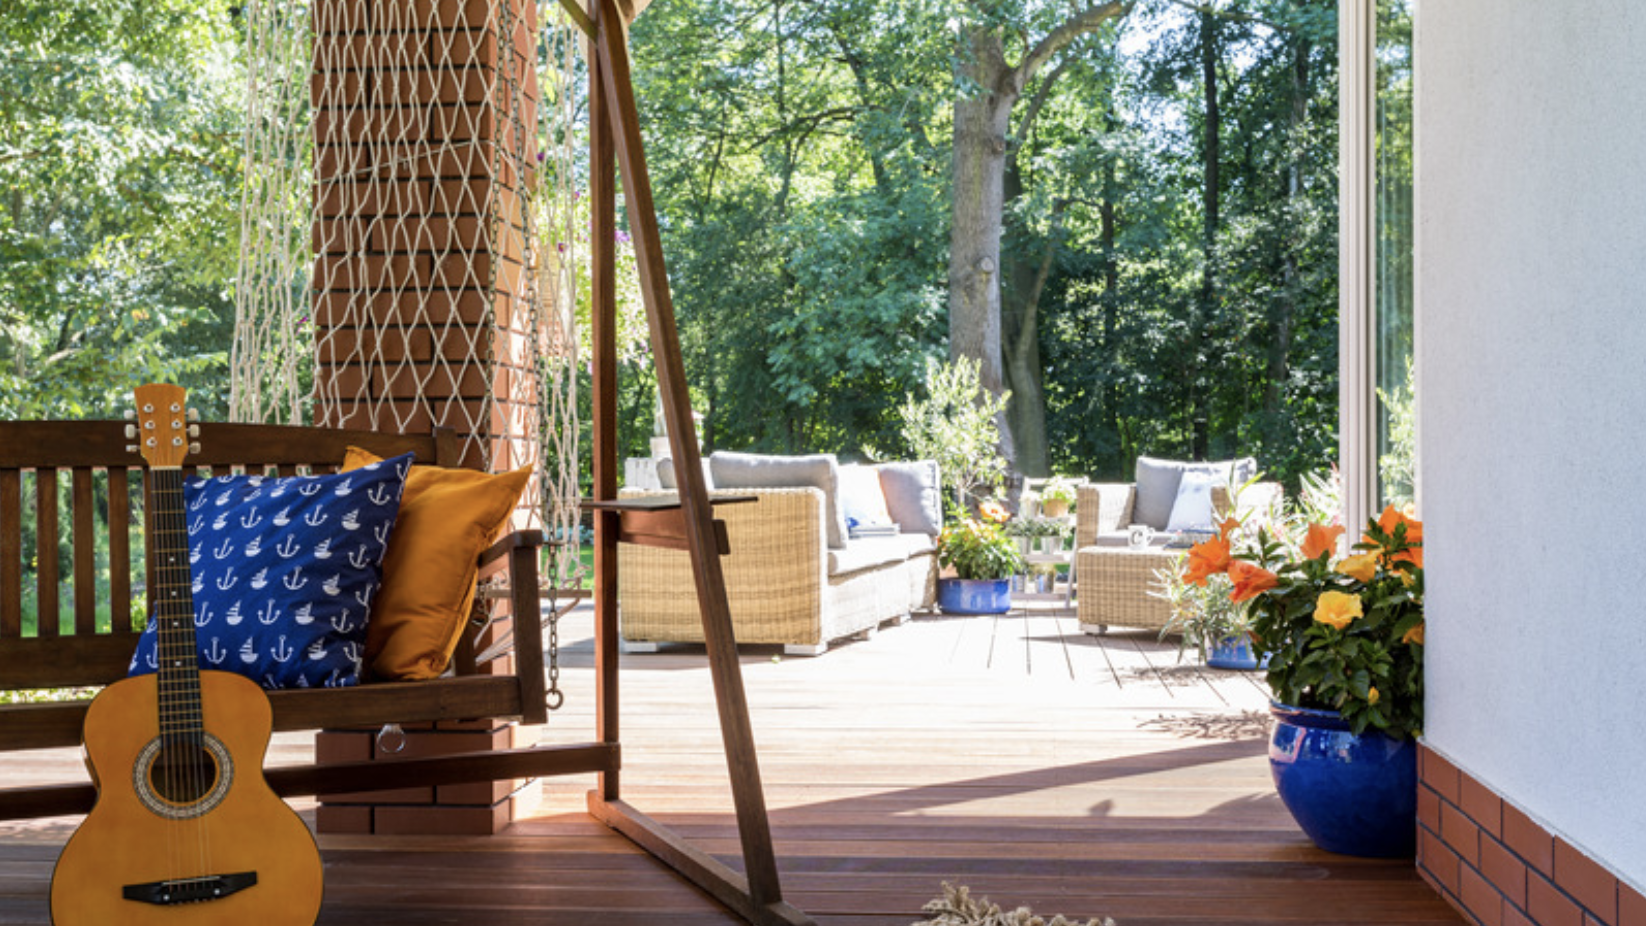 Simple Ways to Spruce Up the Outside of Your Home This Summer